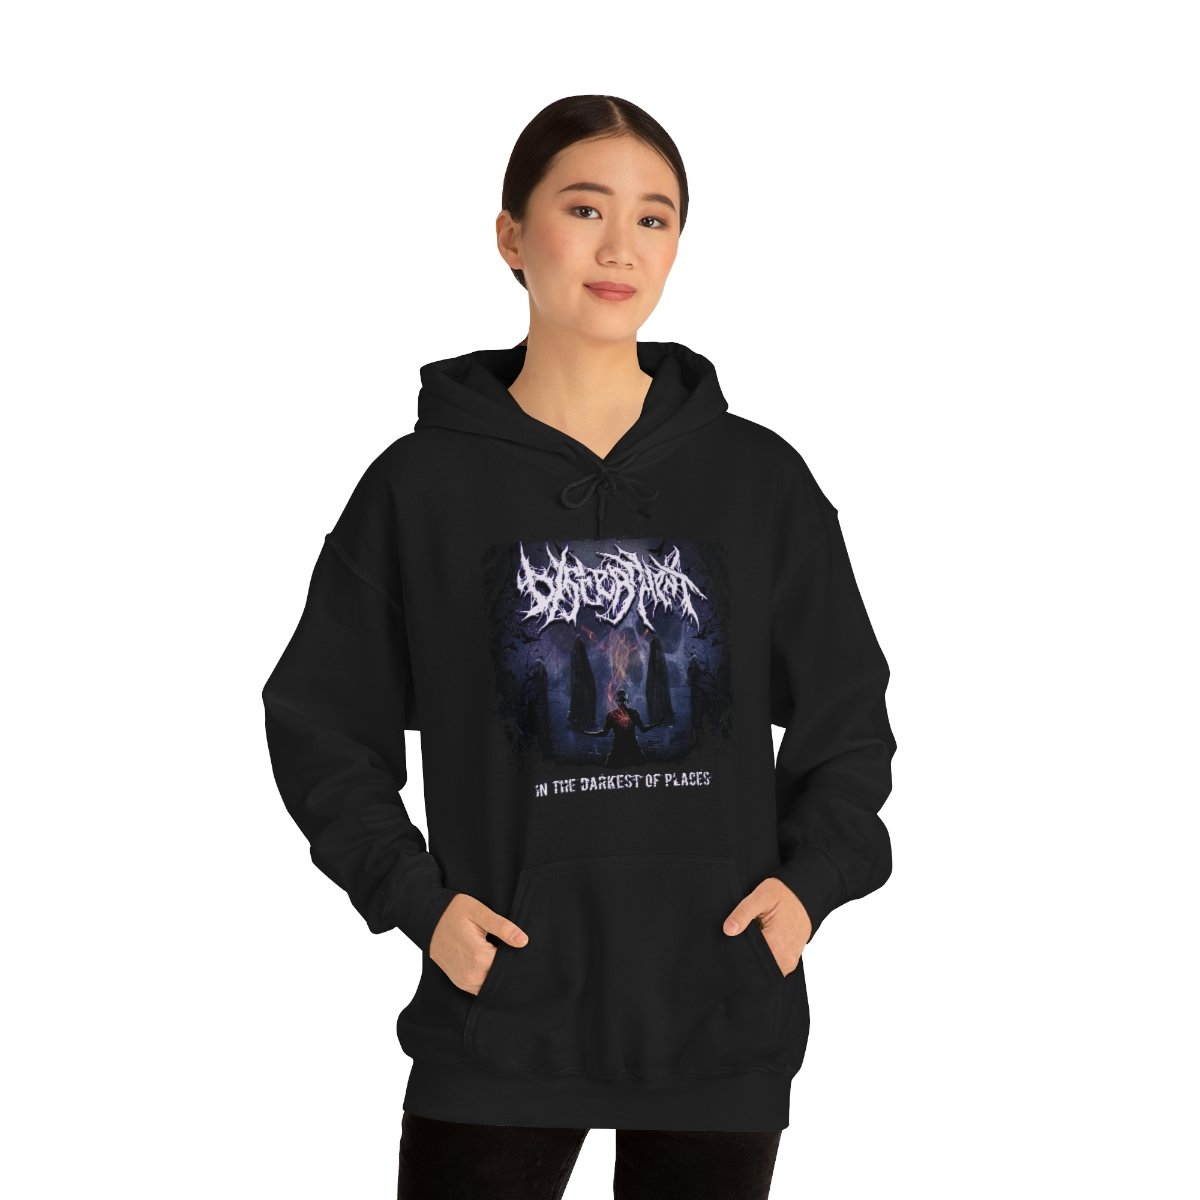 Discernment – In the Darkest of Places Pullover Hooded Sweatshirt